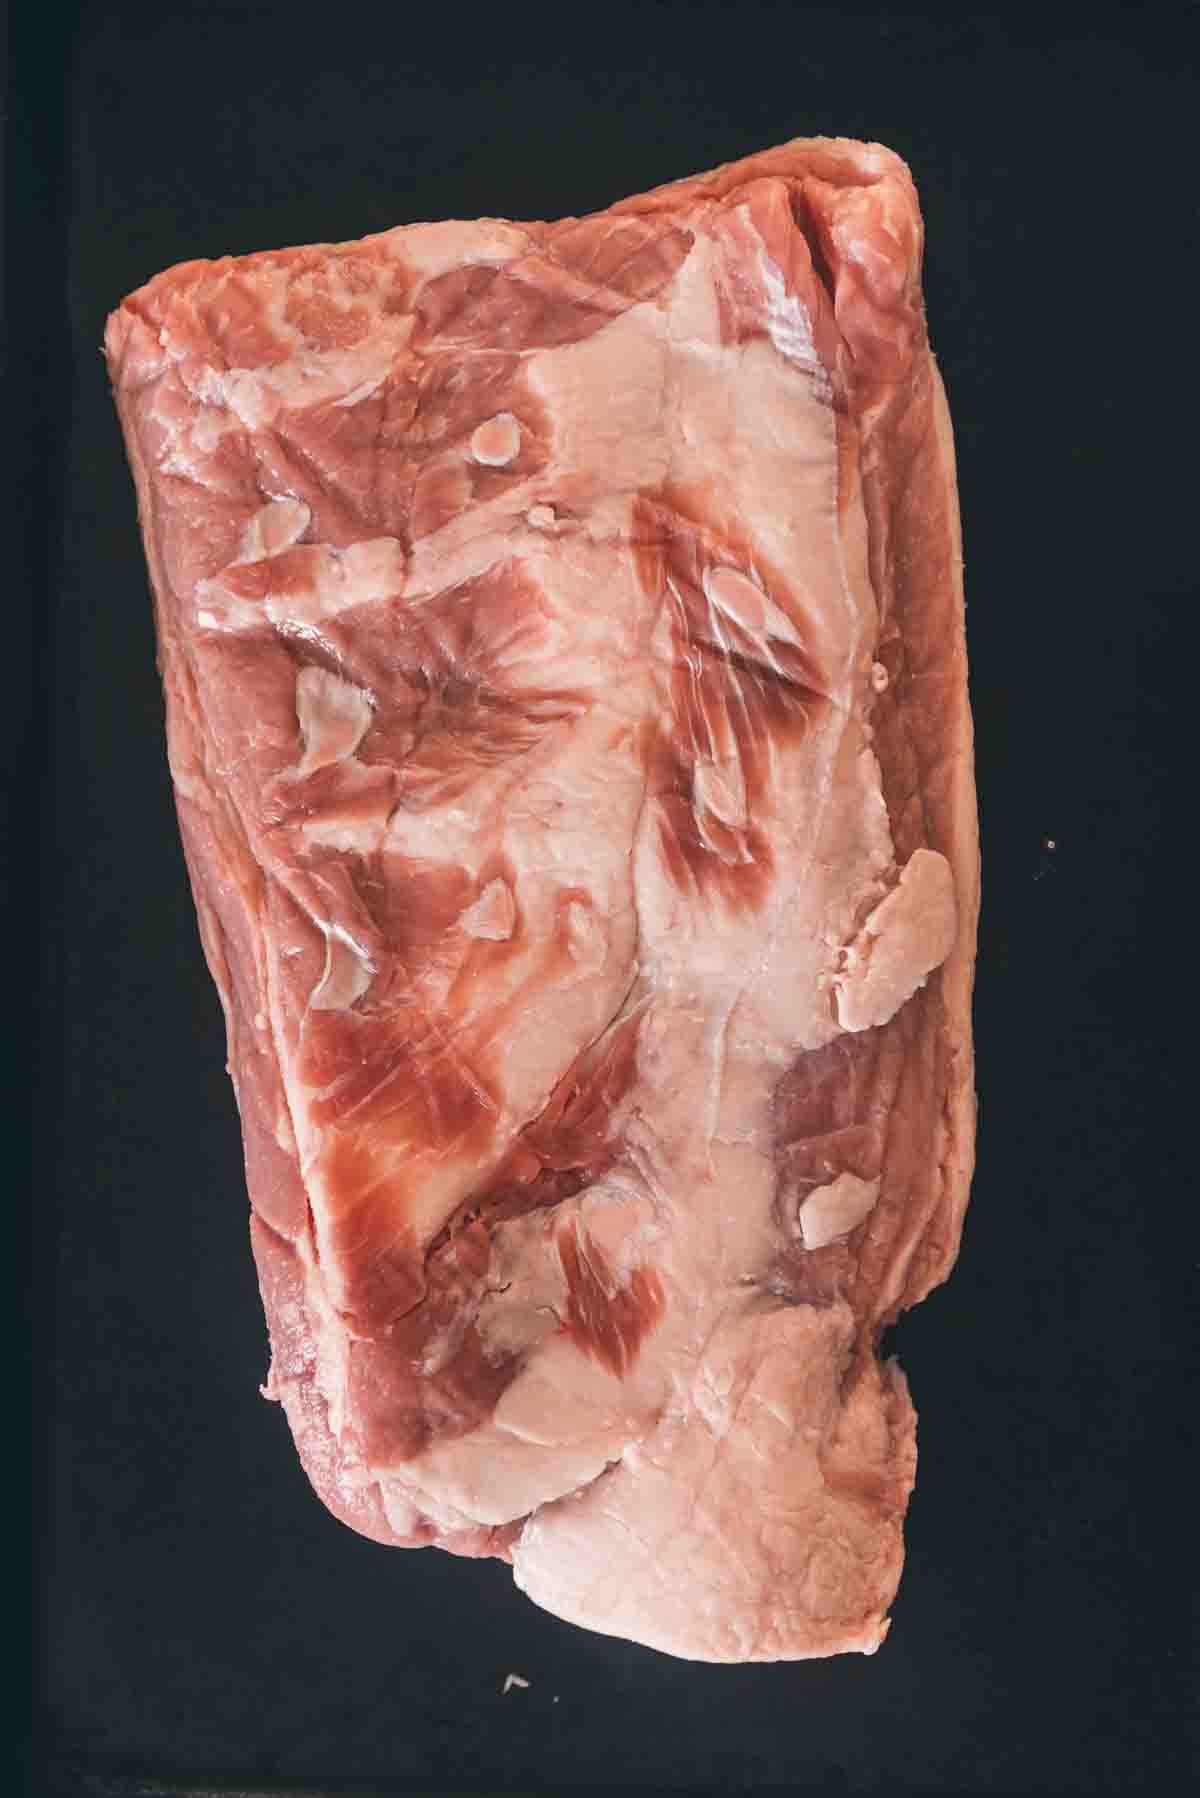 Breast of veal to show the cut, fat side down.